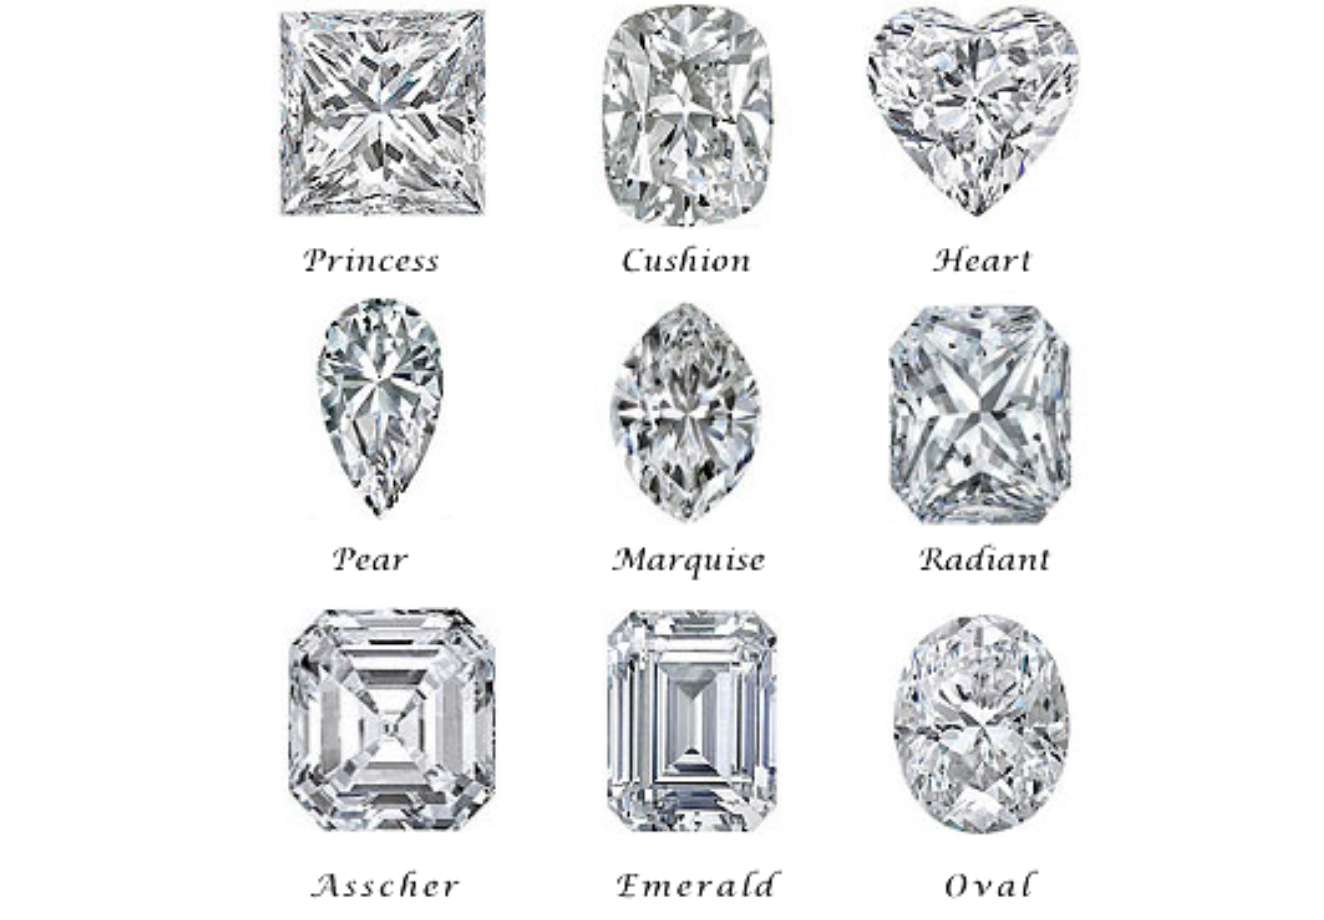 Before buying jewellery or jewels, 'Fancy' Shapes of diamonds